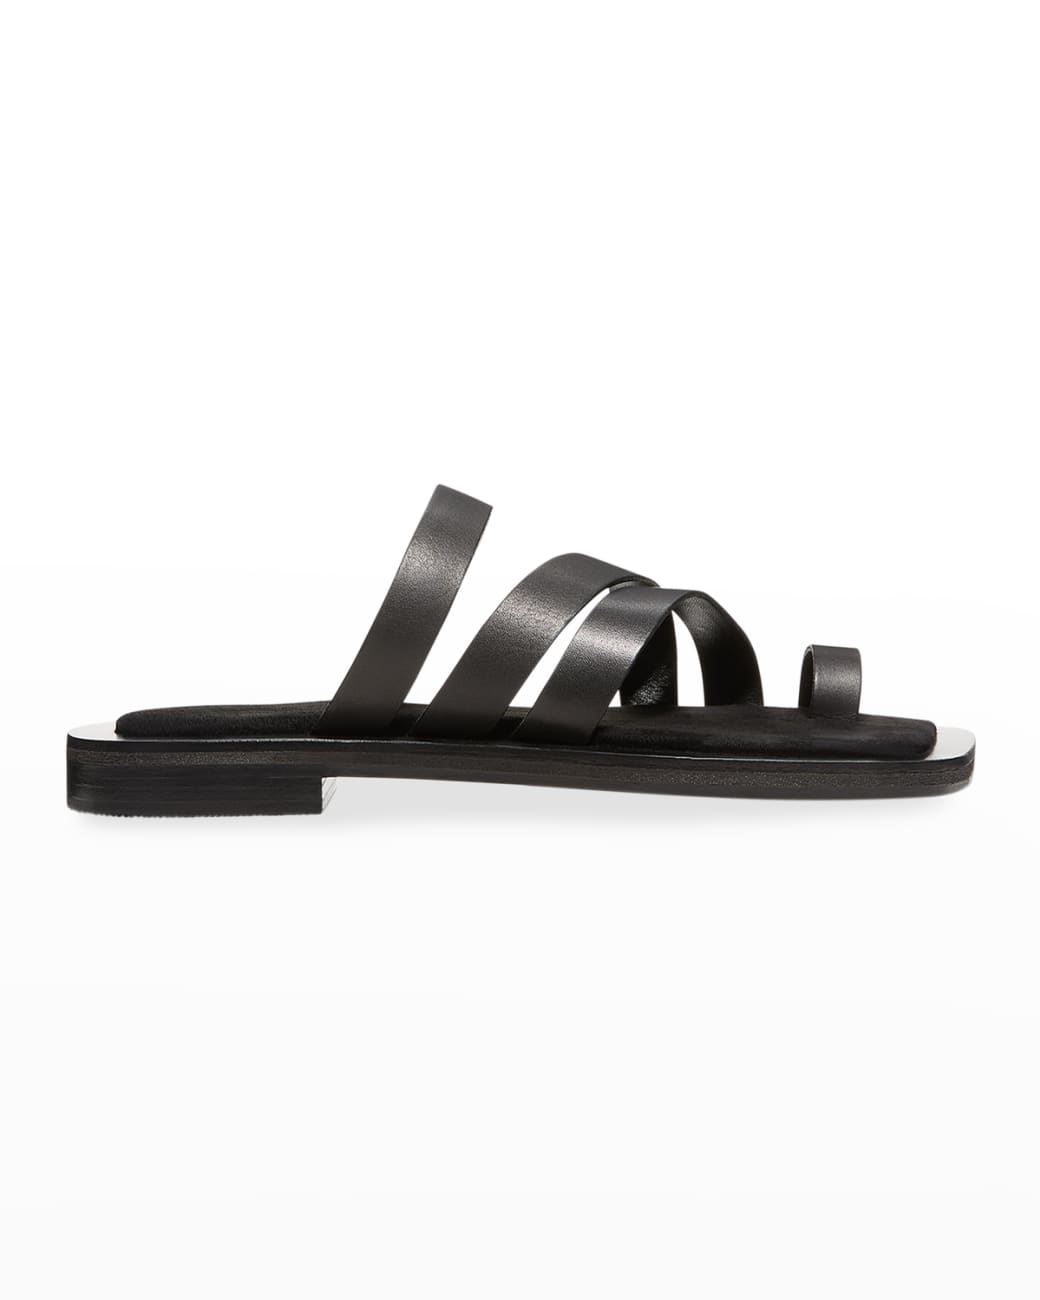 A.EMERY LIAM LEATHER THONG SANDALS,PROD239880372